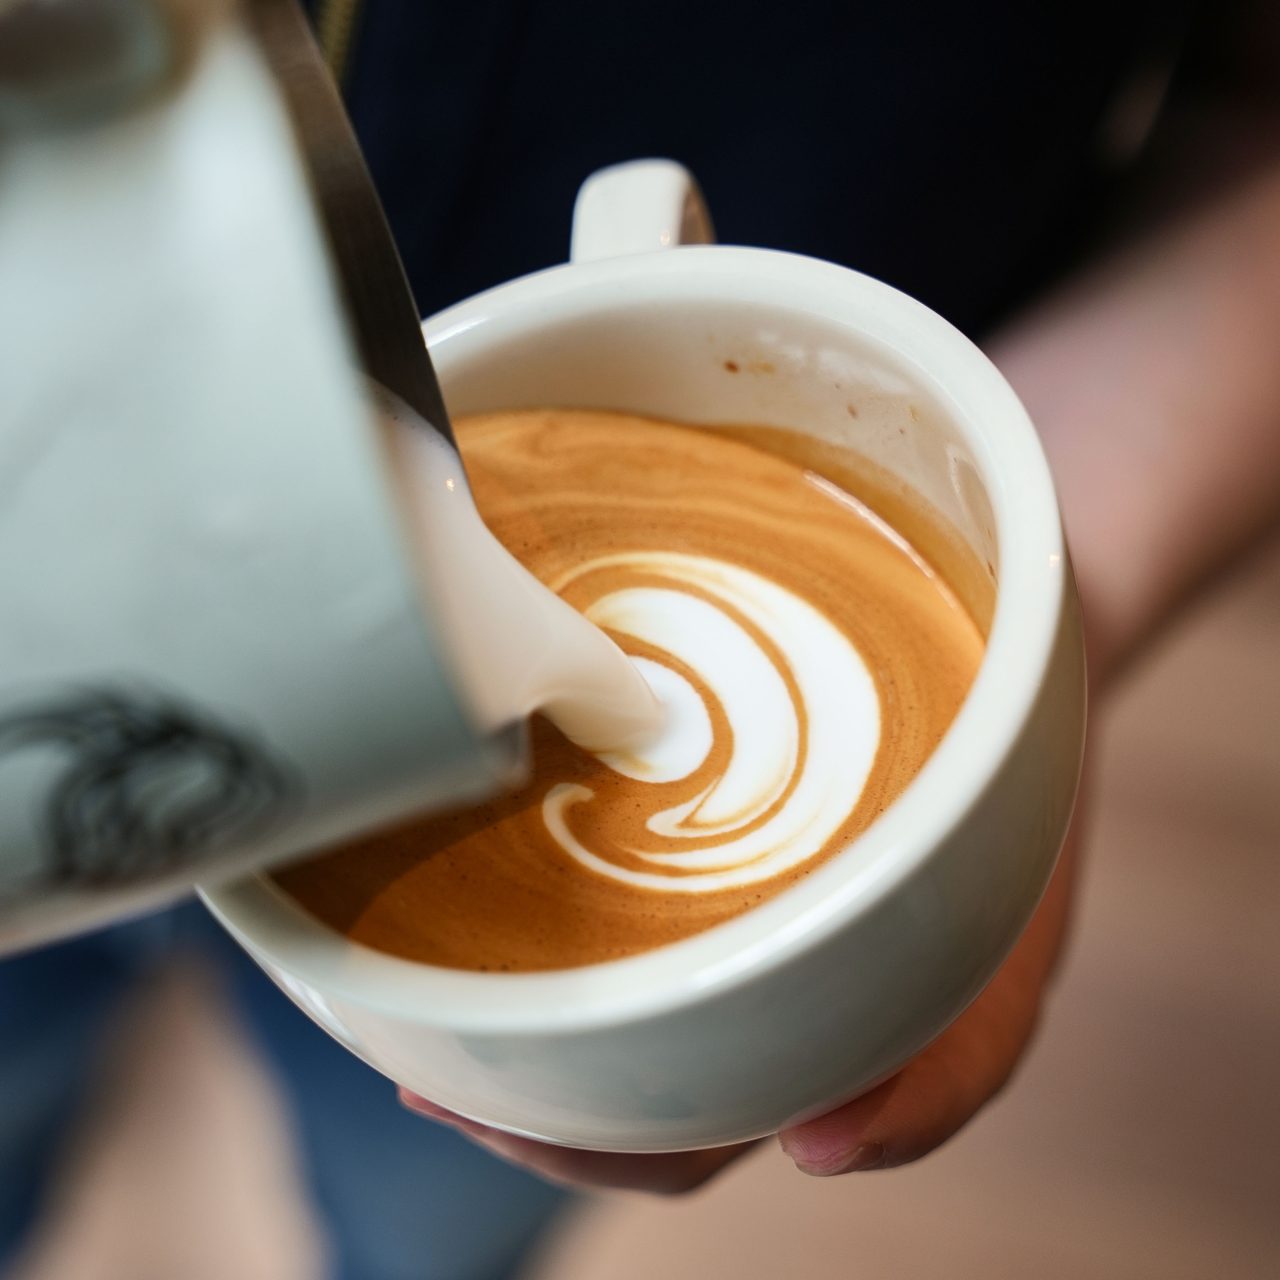 Pouring latte art into a cup